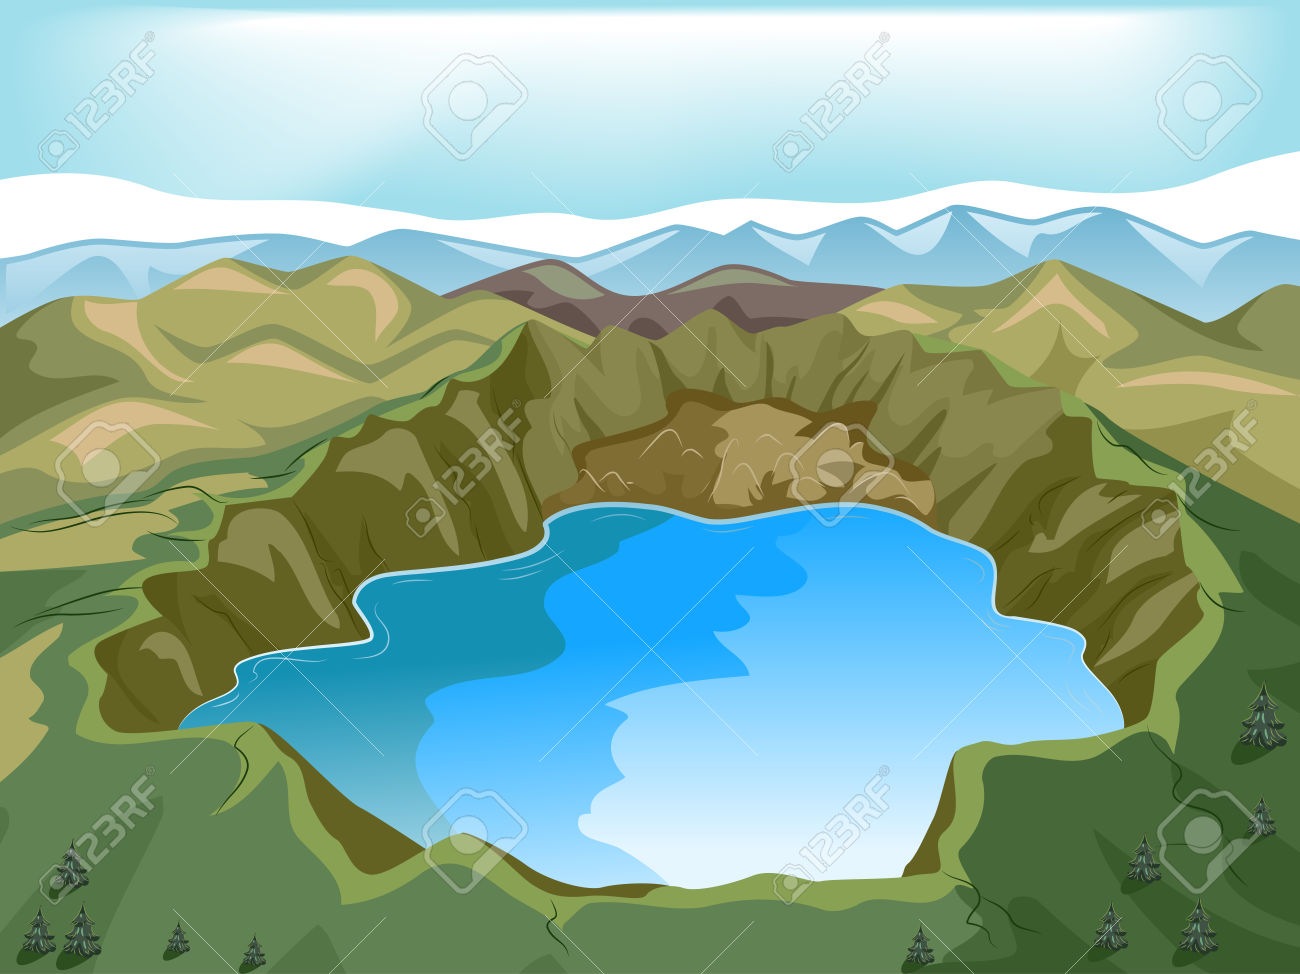 Crater lake clipart.